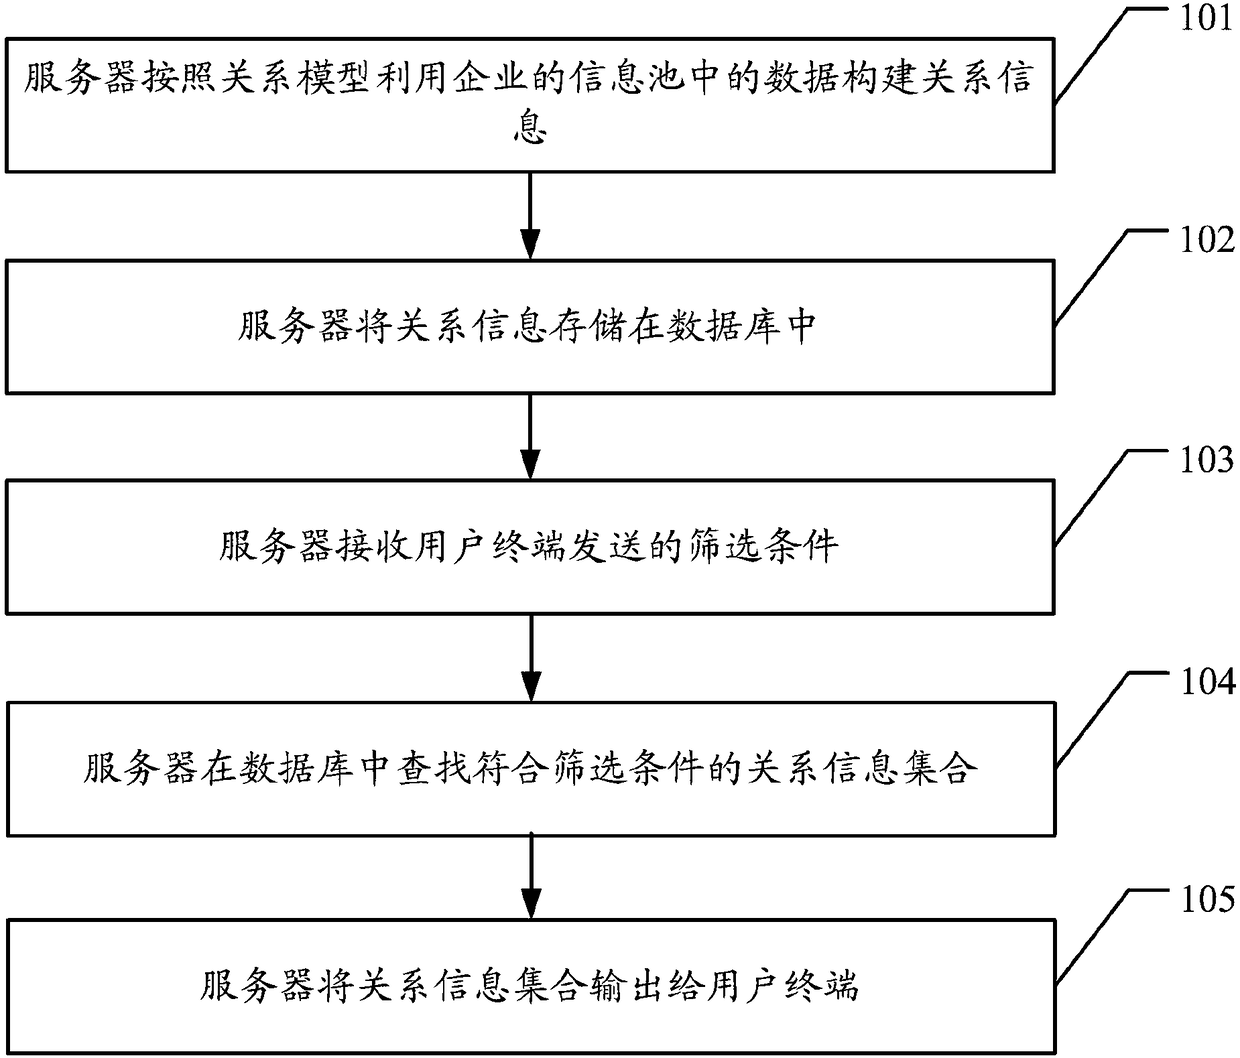 Relation information processing method and device for enterprise